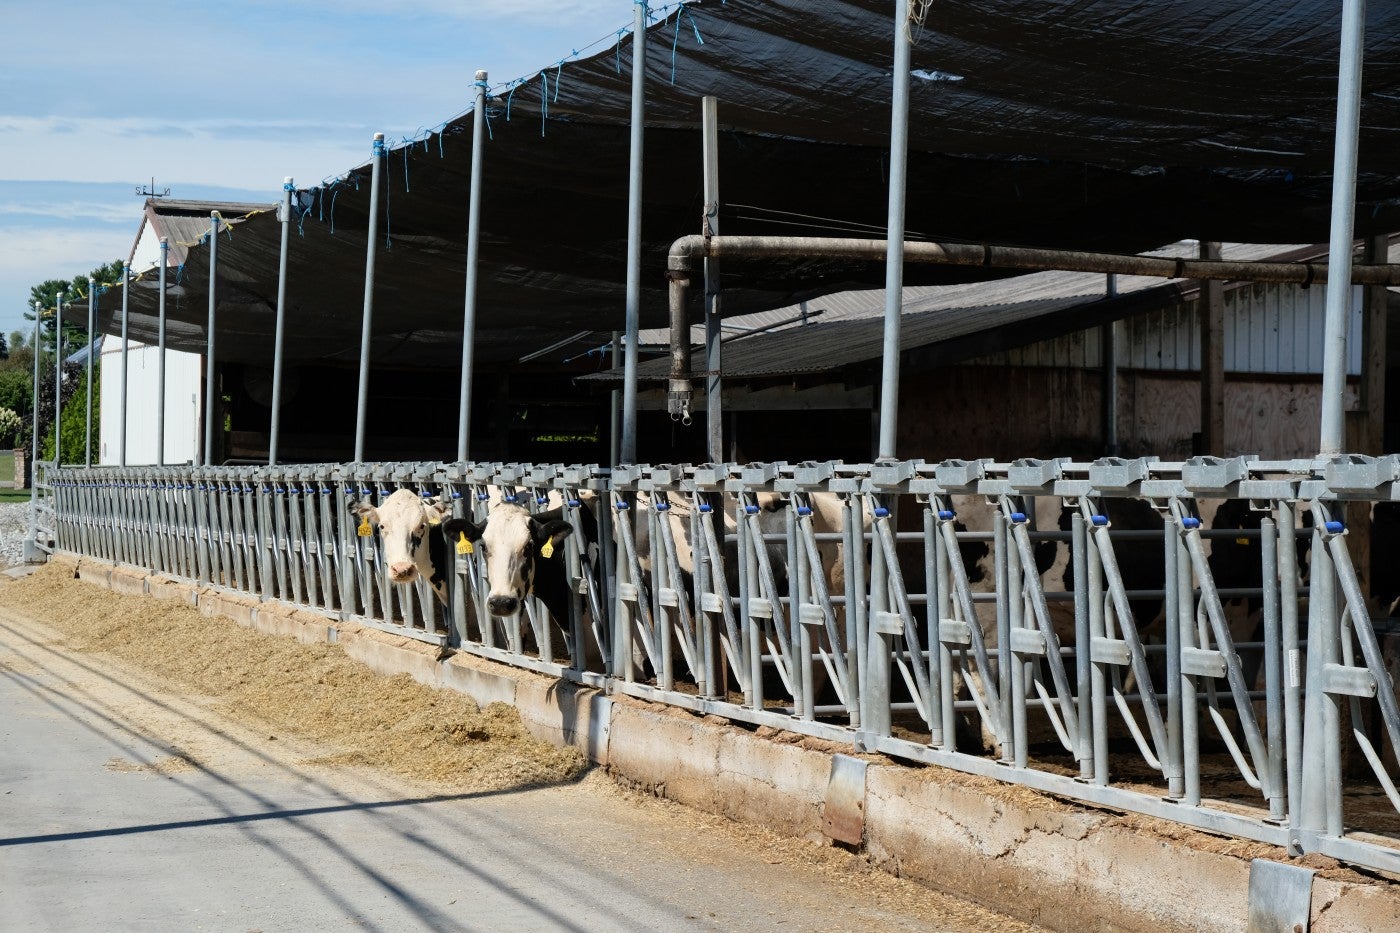 Two cows poke their heads through the slats at a feedlot on a dairy farm